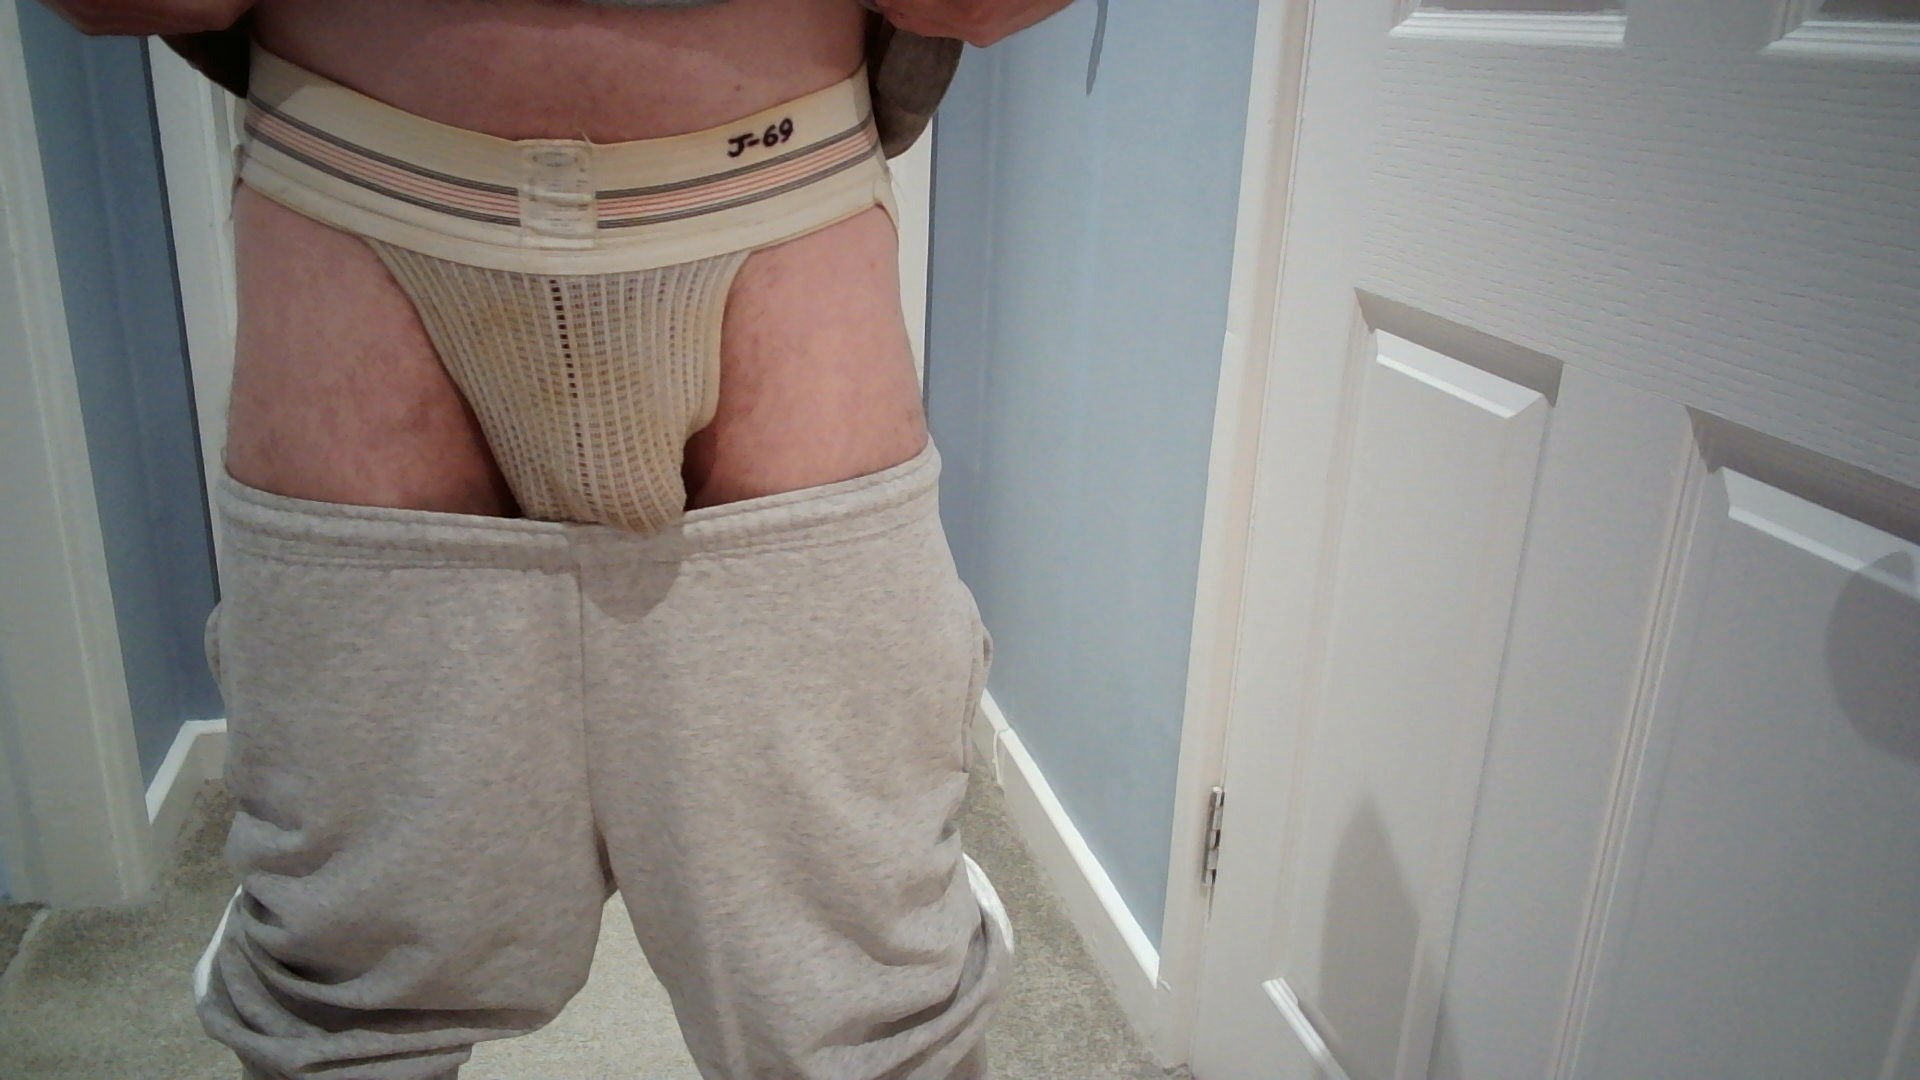 The contrast between the ultra clean jogging bottoms/sweat pants and the filthy, ripe and rank Bike #10 jockstrap